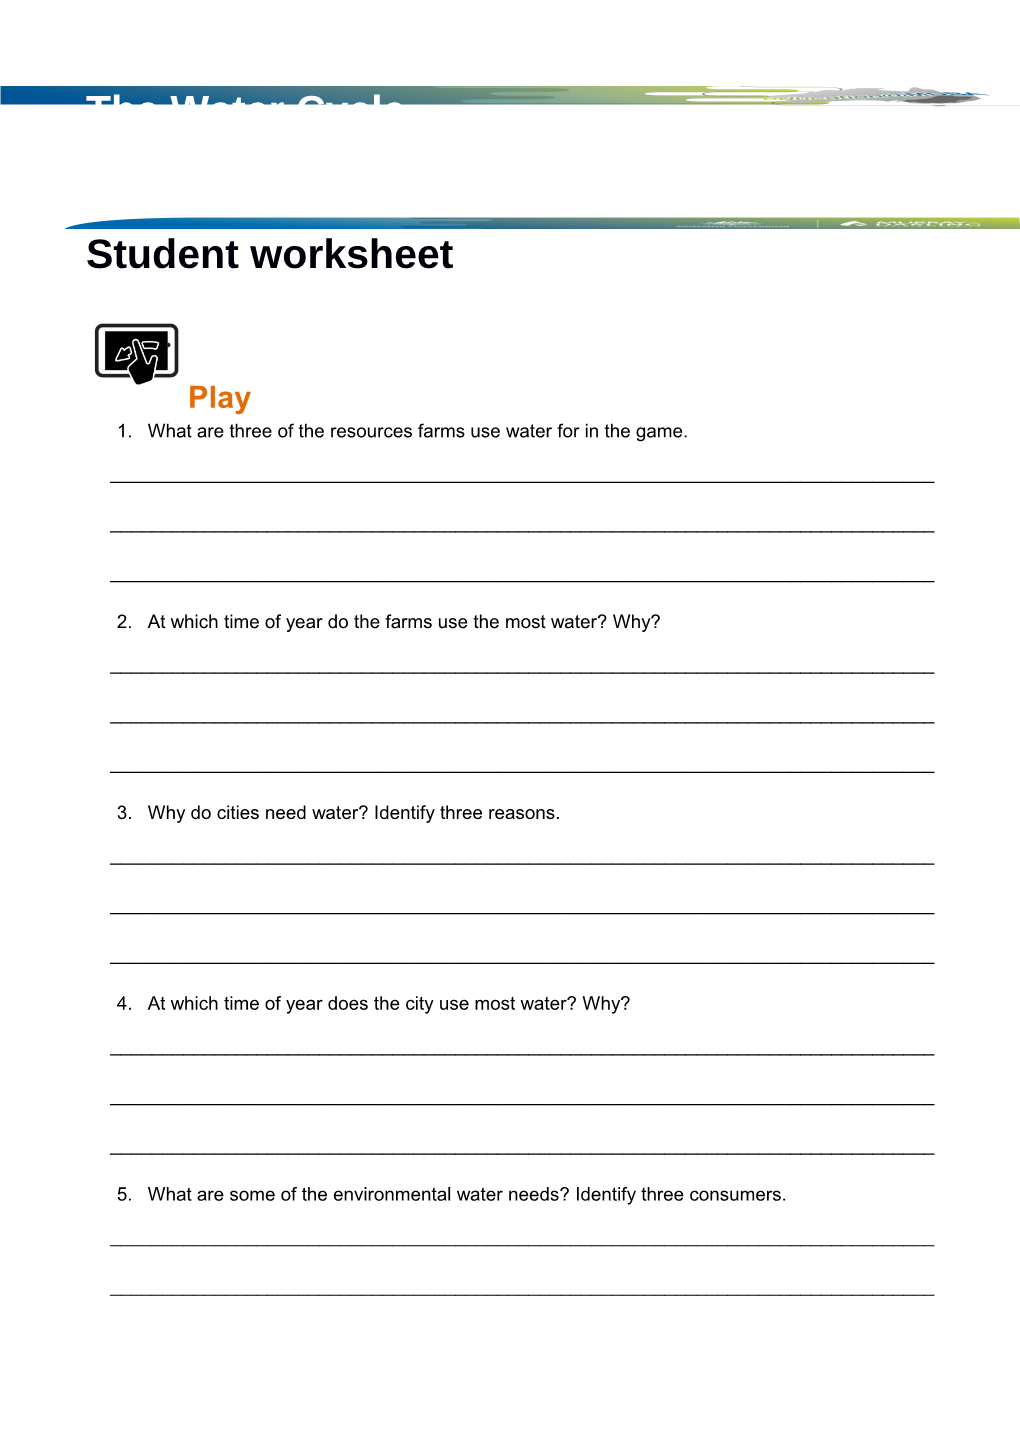 The Water Cycle in the Murray-Darling Basin Student Worksheet